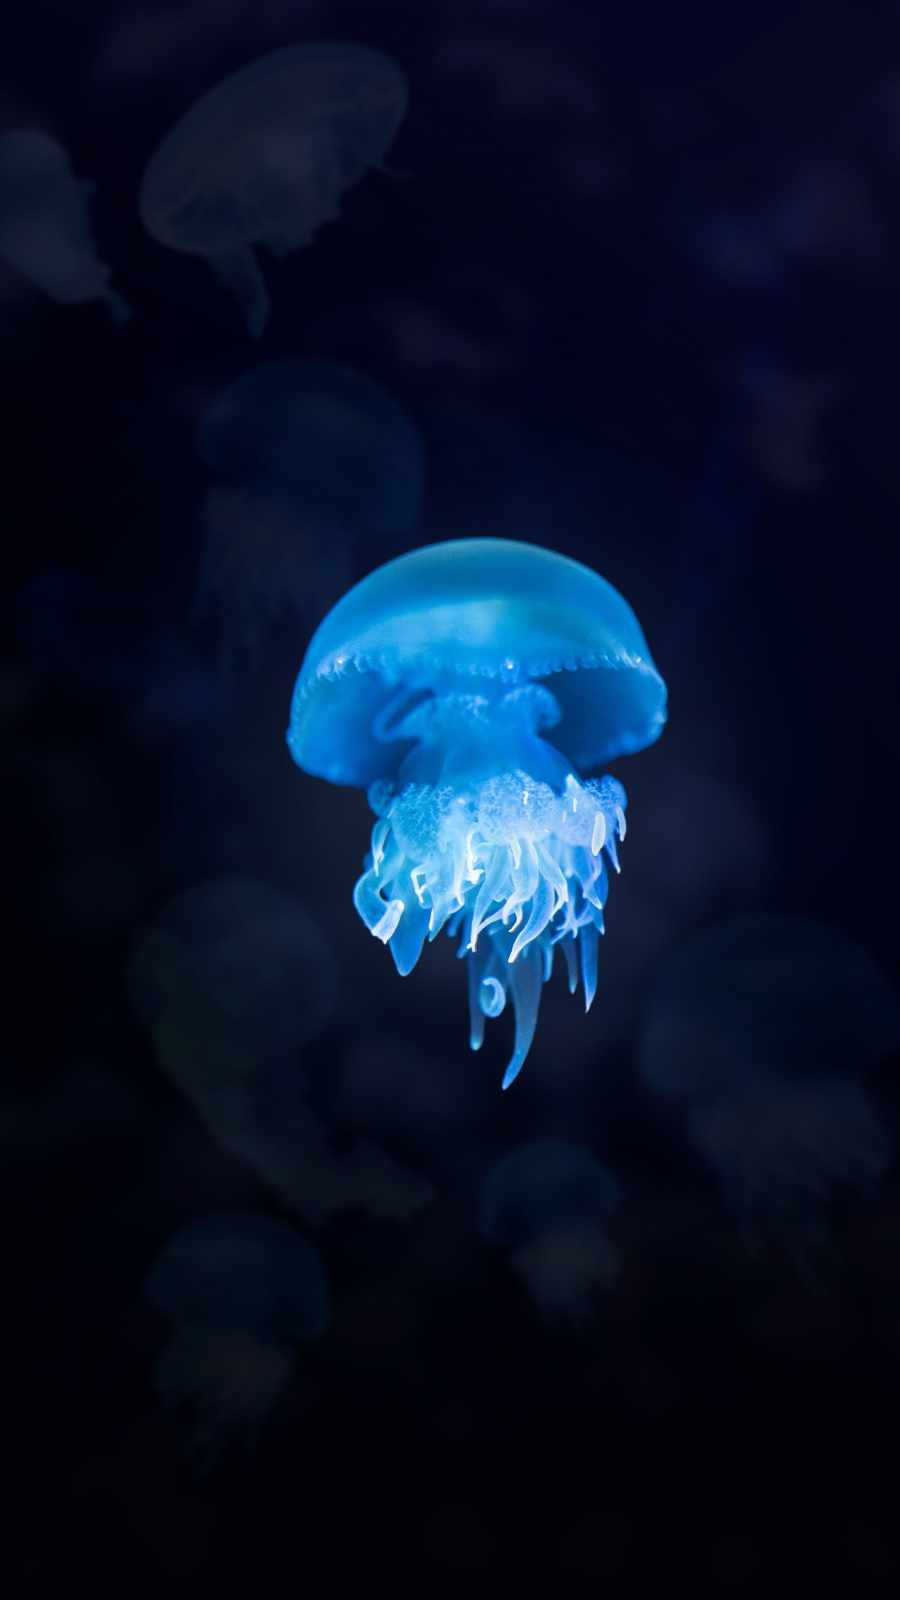 Jellyfish Glow IPhone Wallpaper - IPhone Wallpapers : iPhone Wallpapers